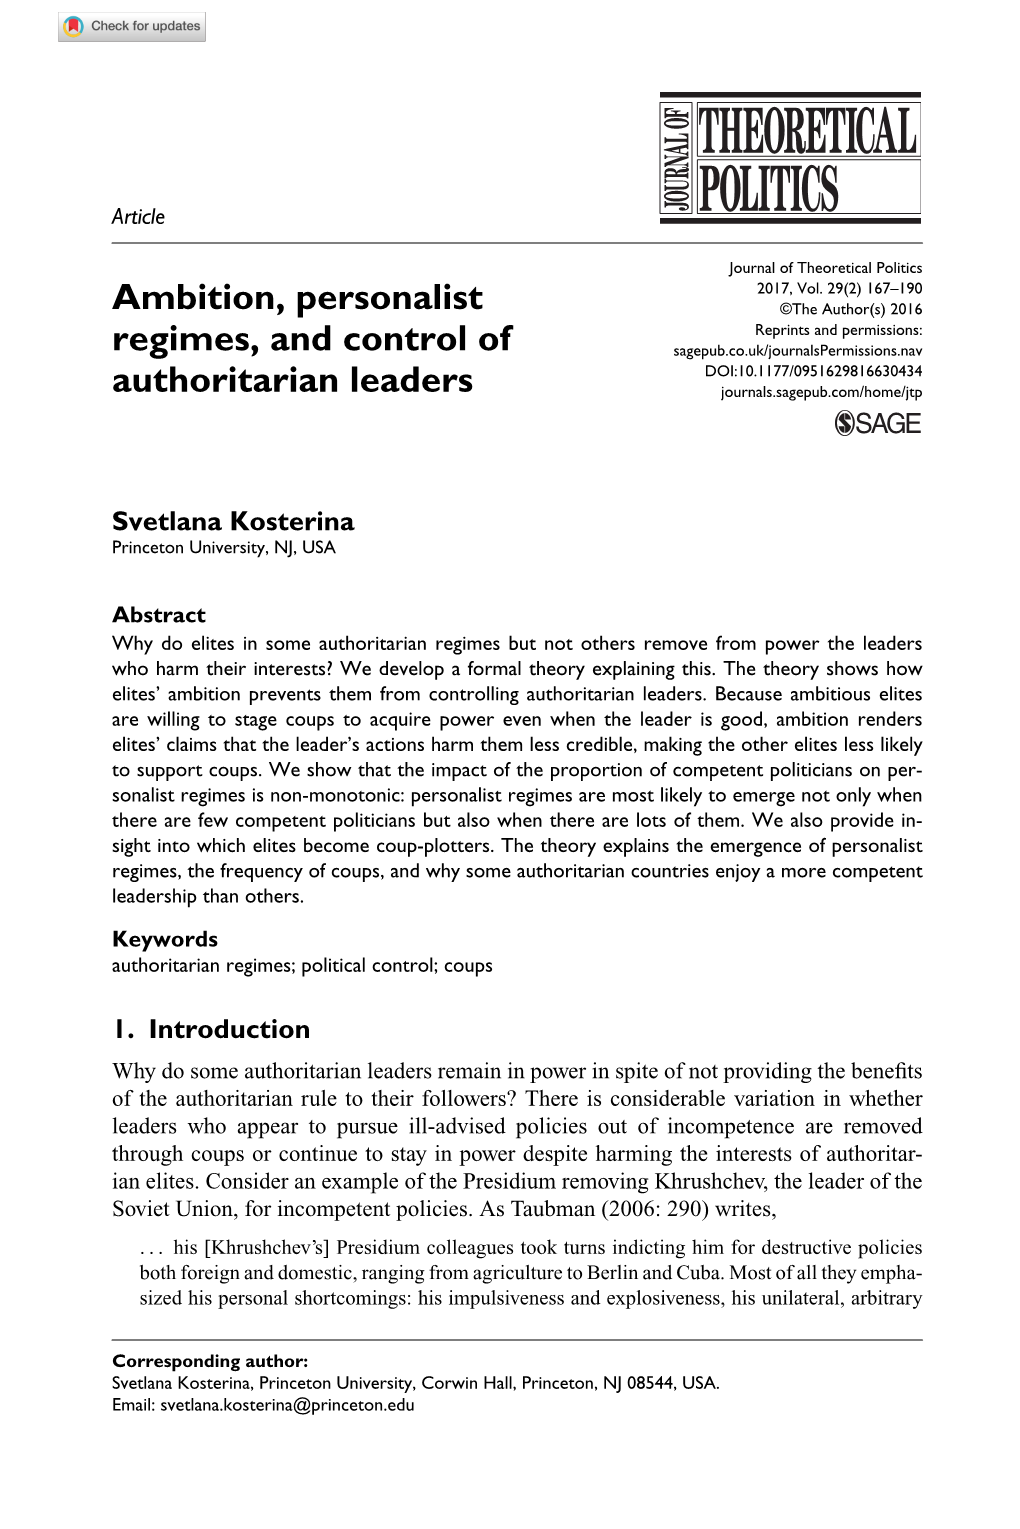 Ambition, Personalist Regimes, and Control of Authoritarian Leaders